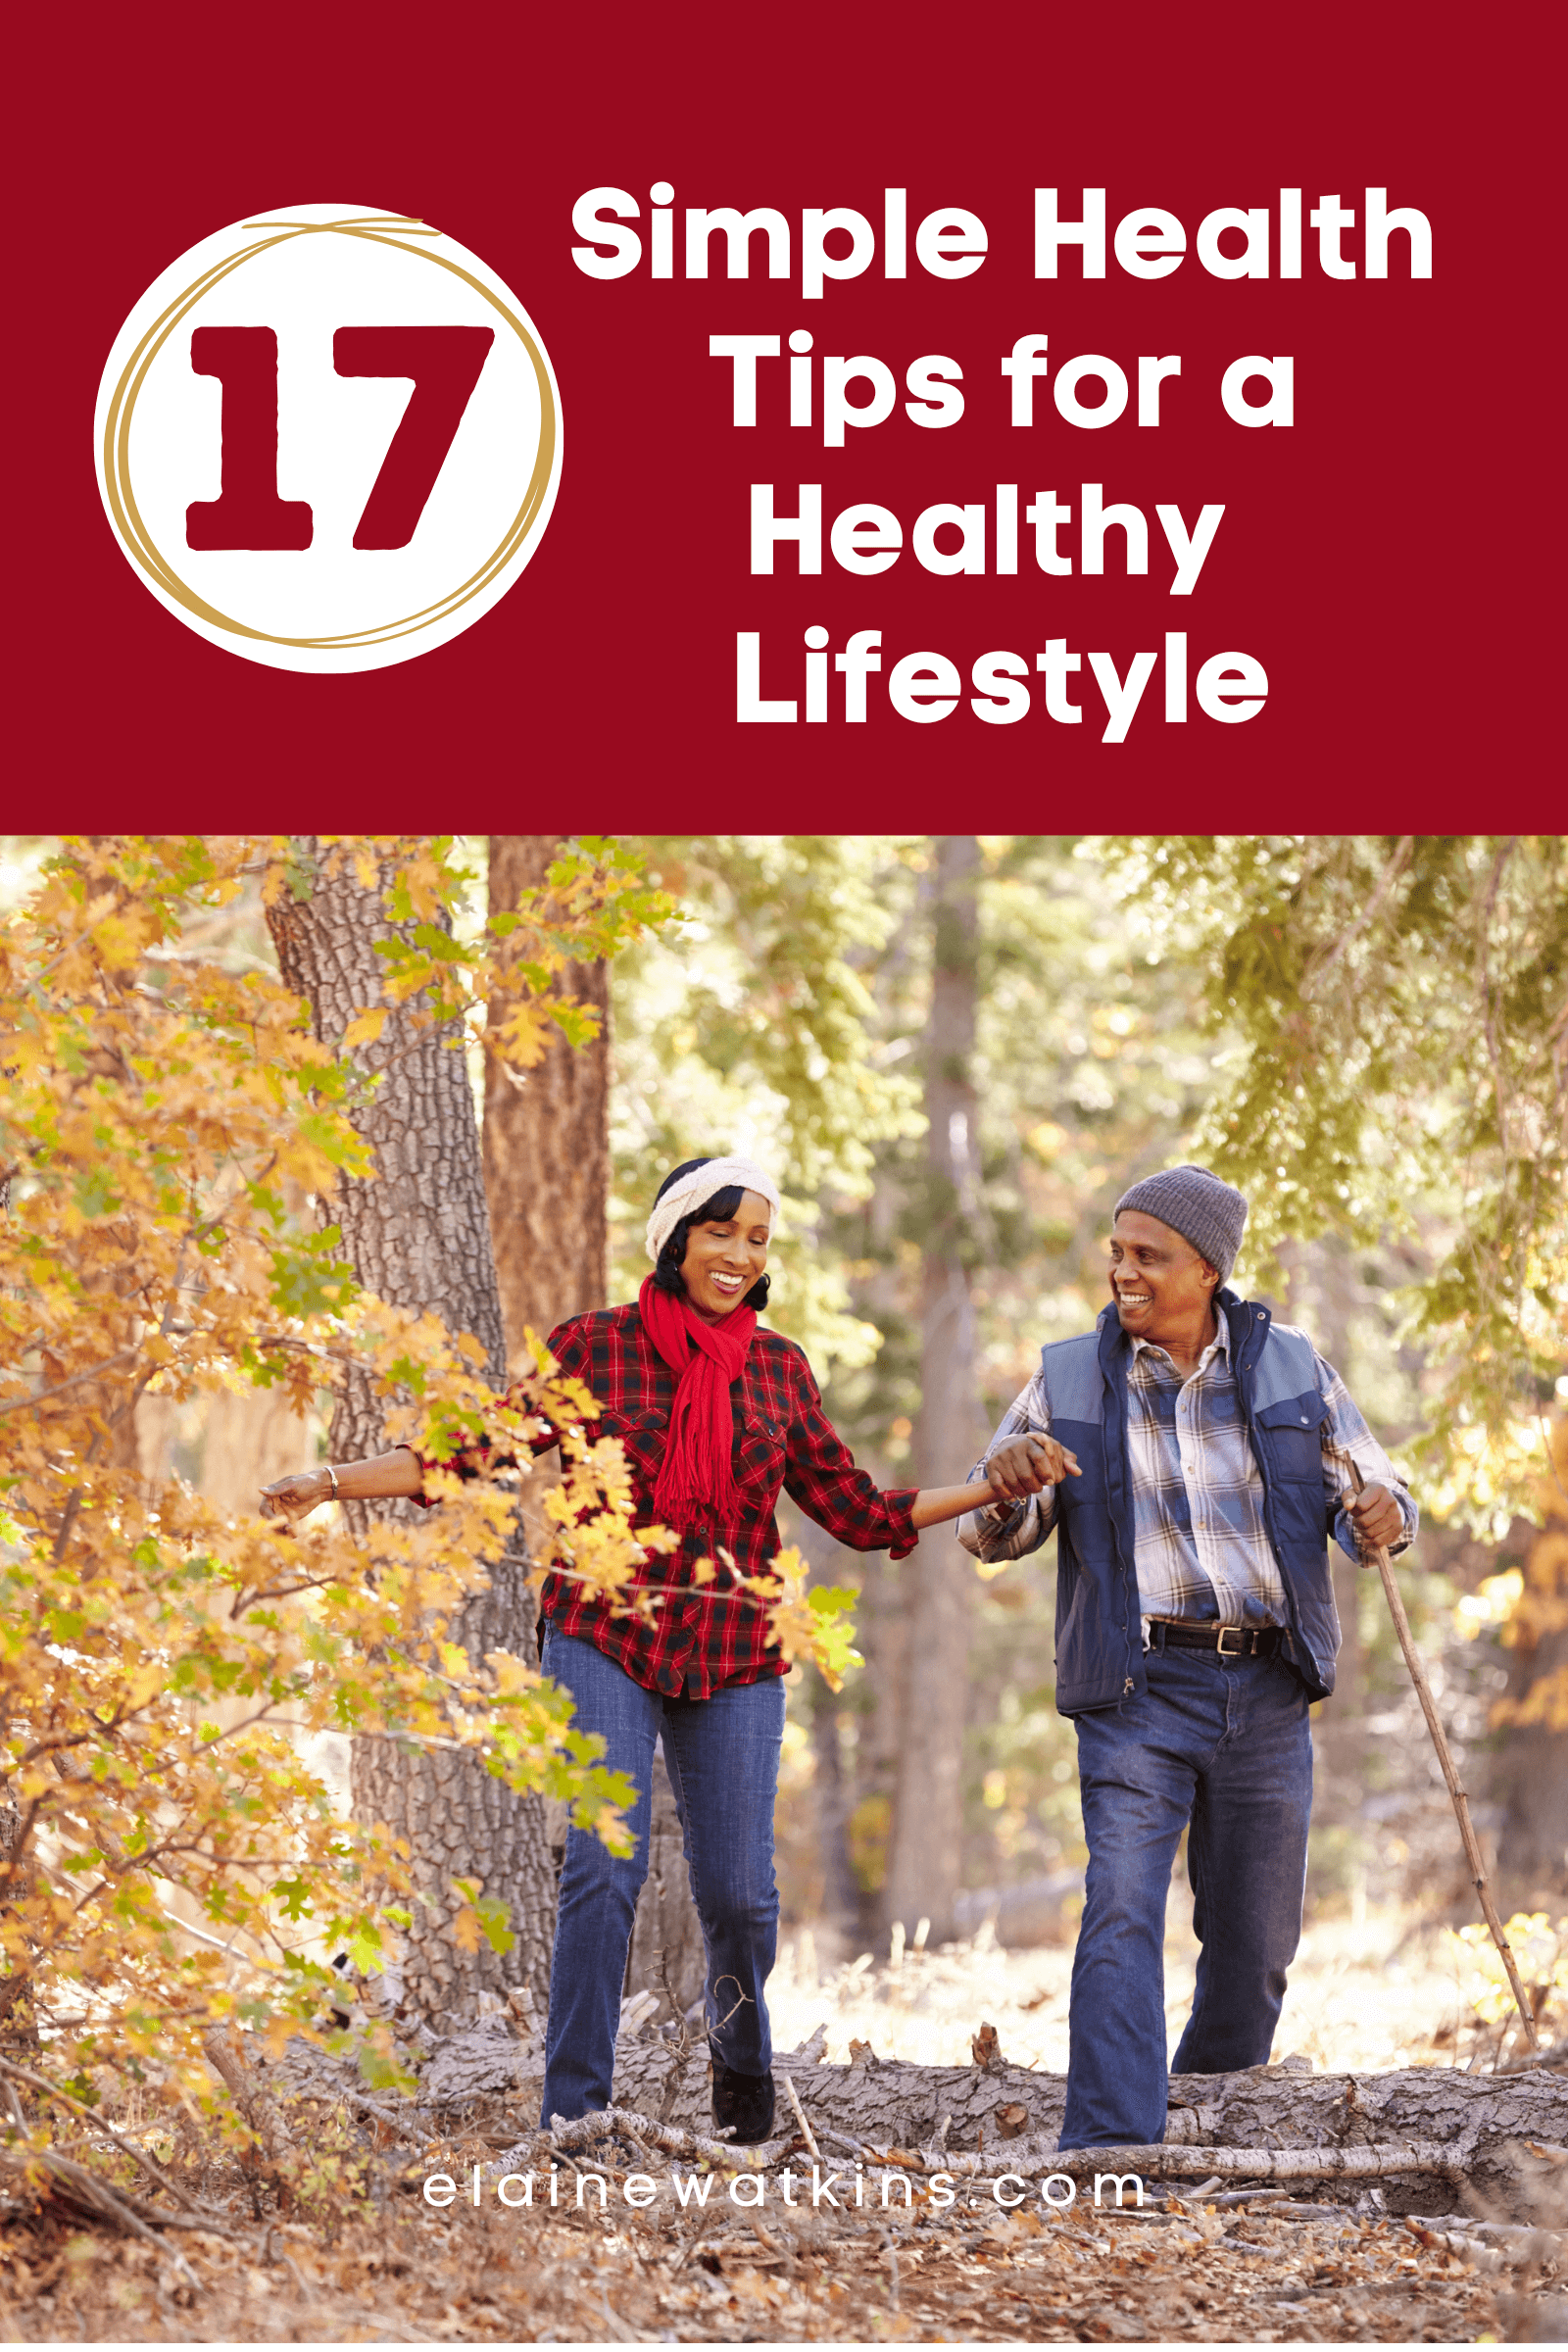 17 Simple Health Tips for a Healthy Lifestyle